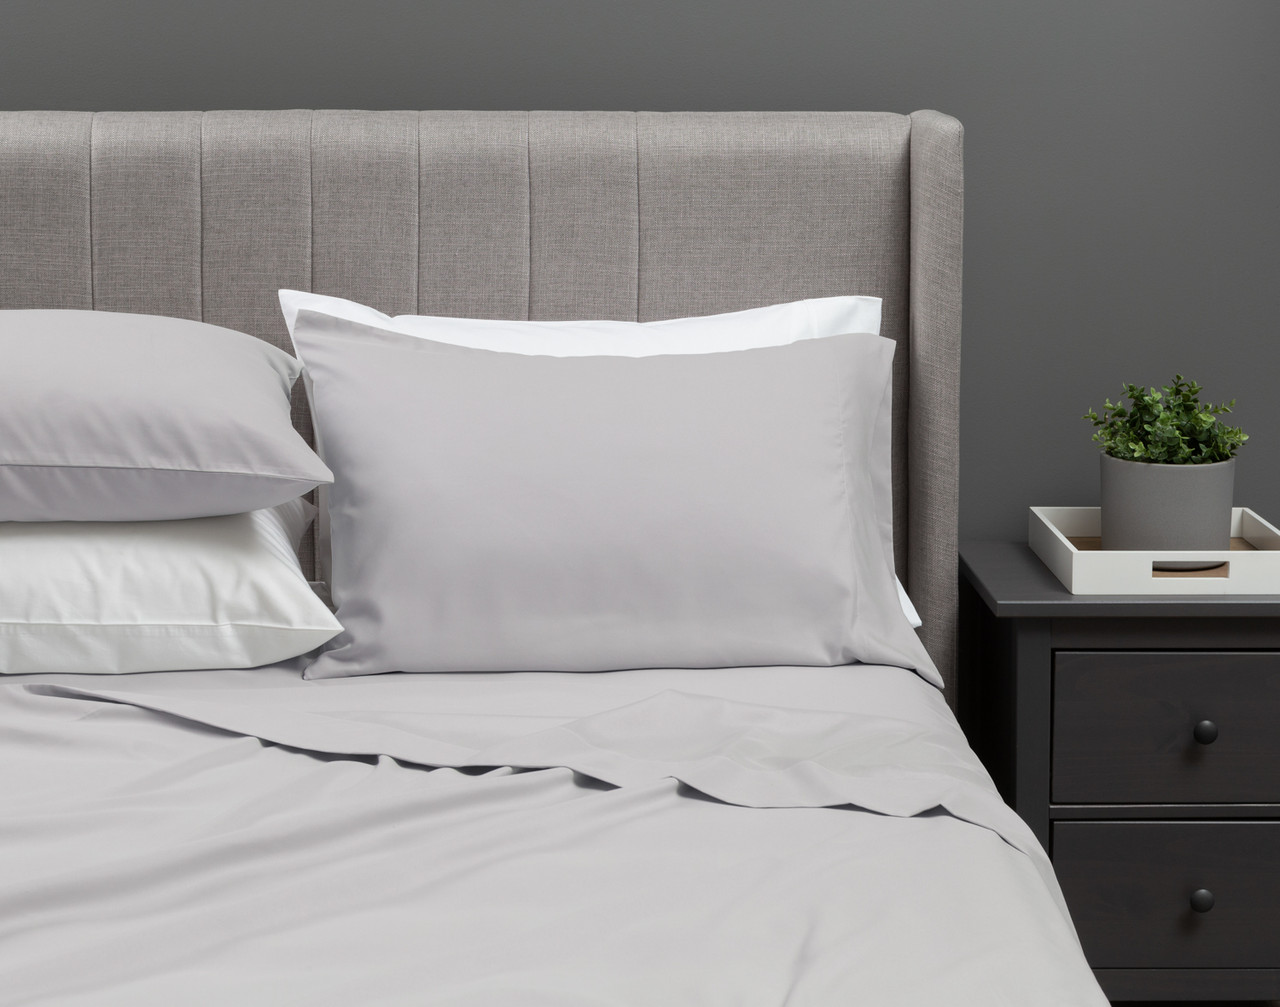 Our Recycled Microfiber Sheet Set in Steel dressed over an undecorated bed in a neutral grey bedroom.